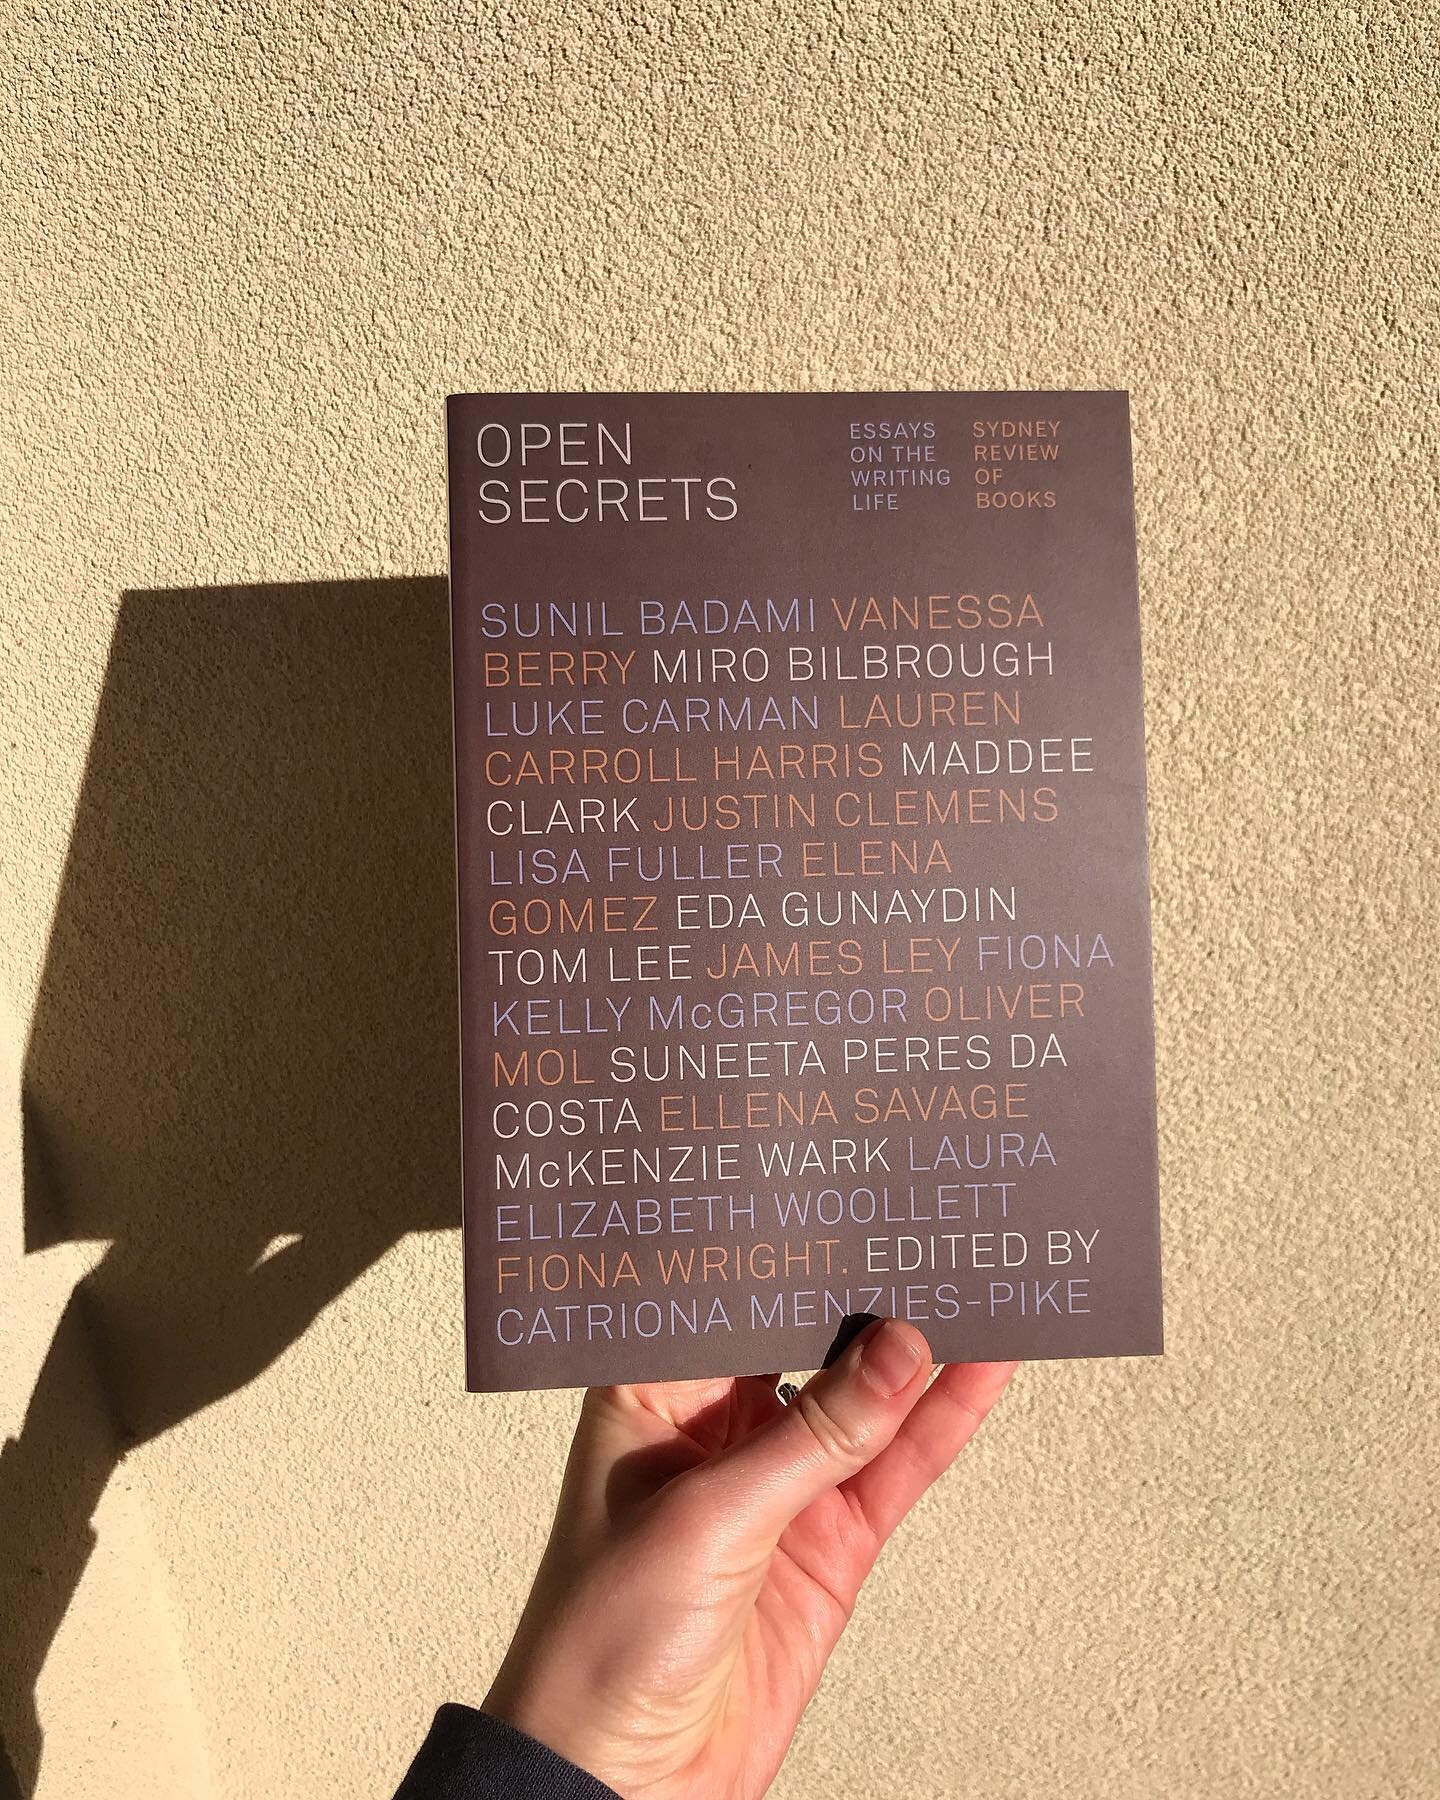 My essay about being shortlisted for a big $$$ award, not winning, and going back to work in the call centre the next day has been republished in @sydreviewbooks anthology &ldquo;Open Secrets&rdquo;, along with a bunch of other amazing pieces on crea